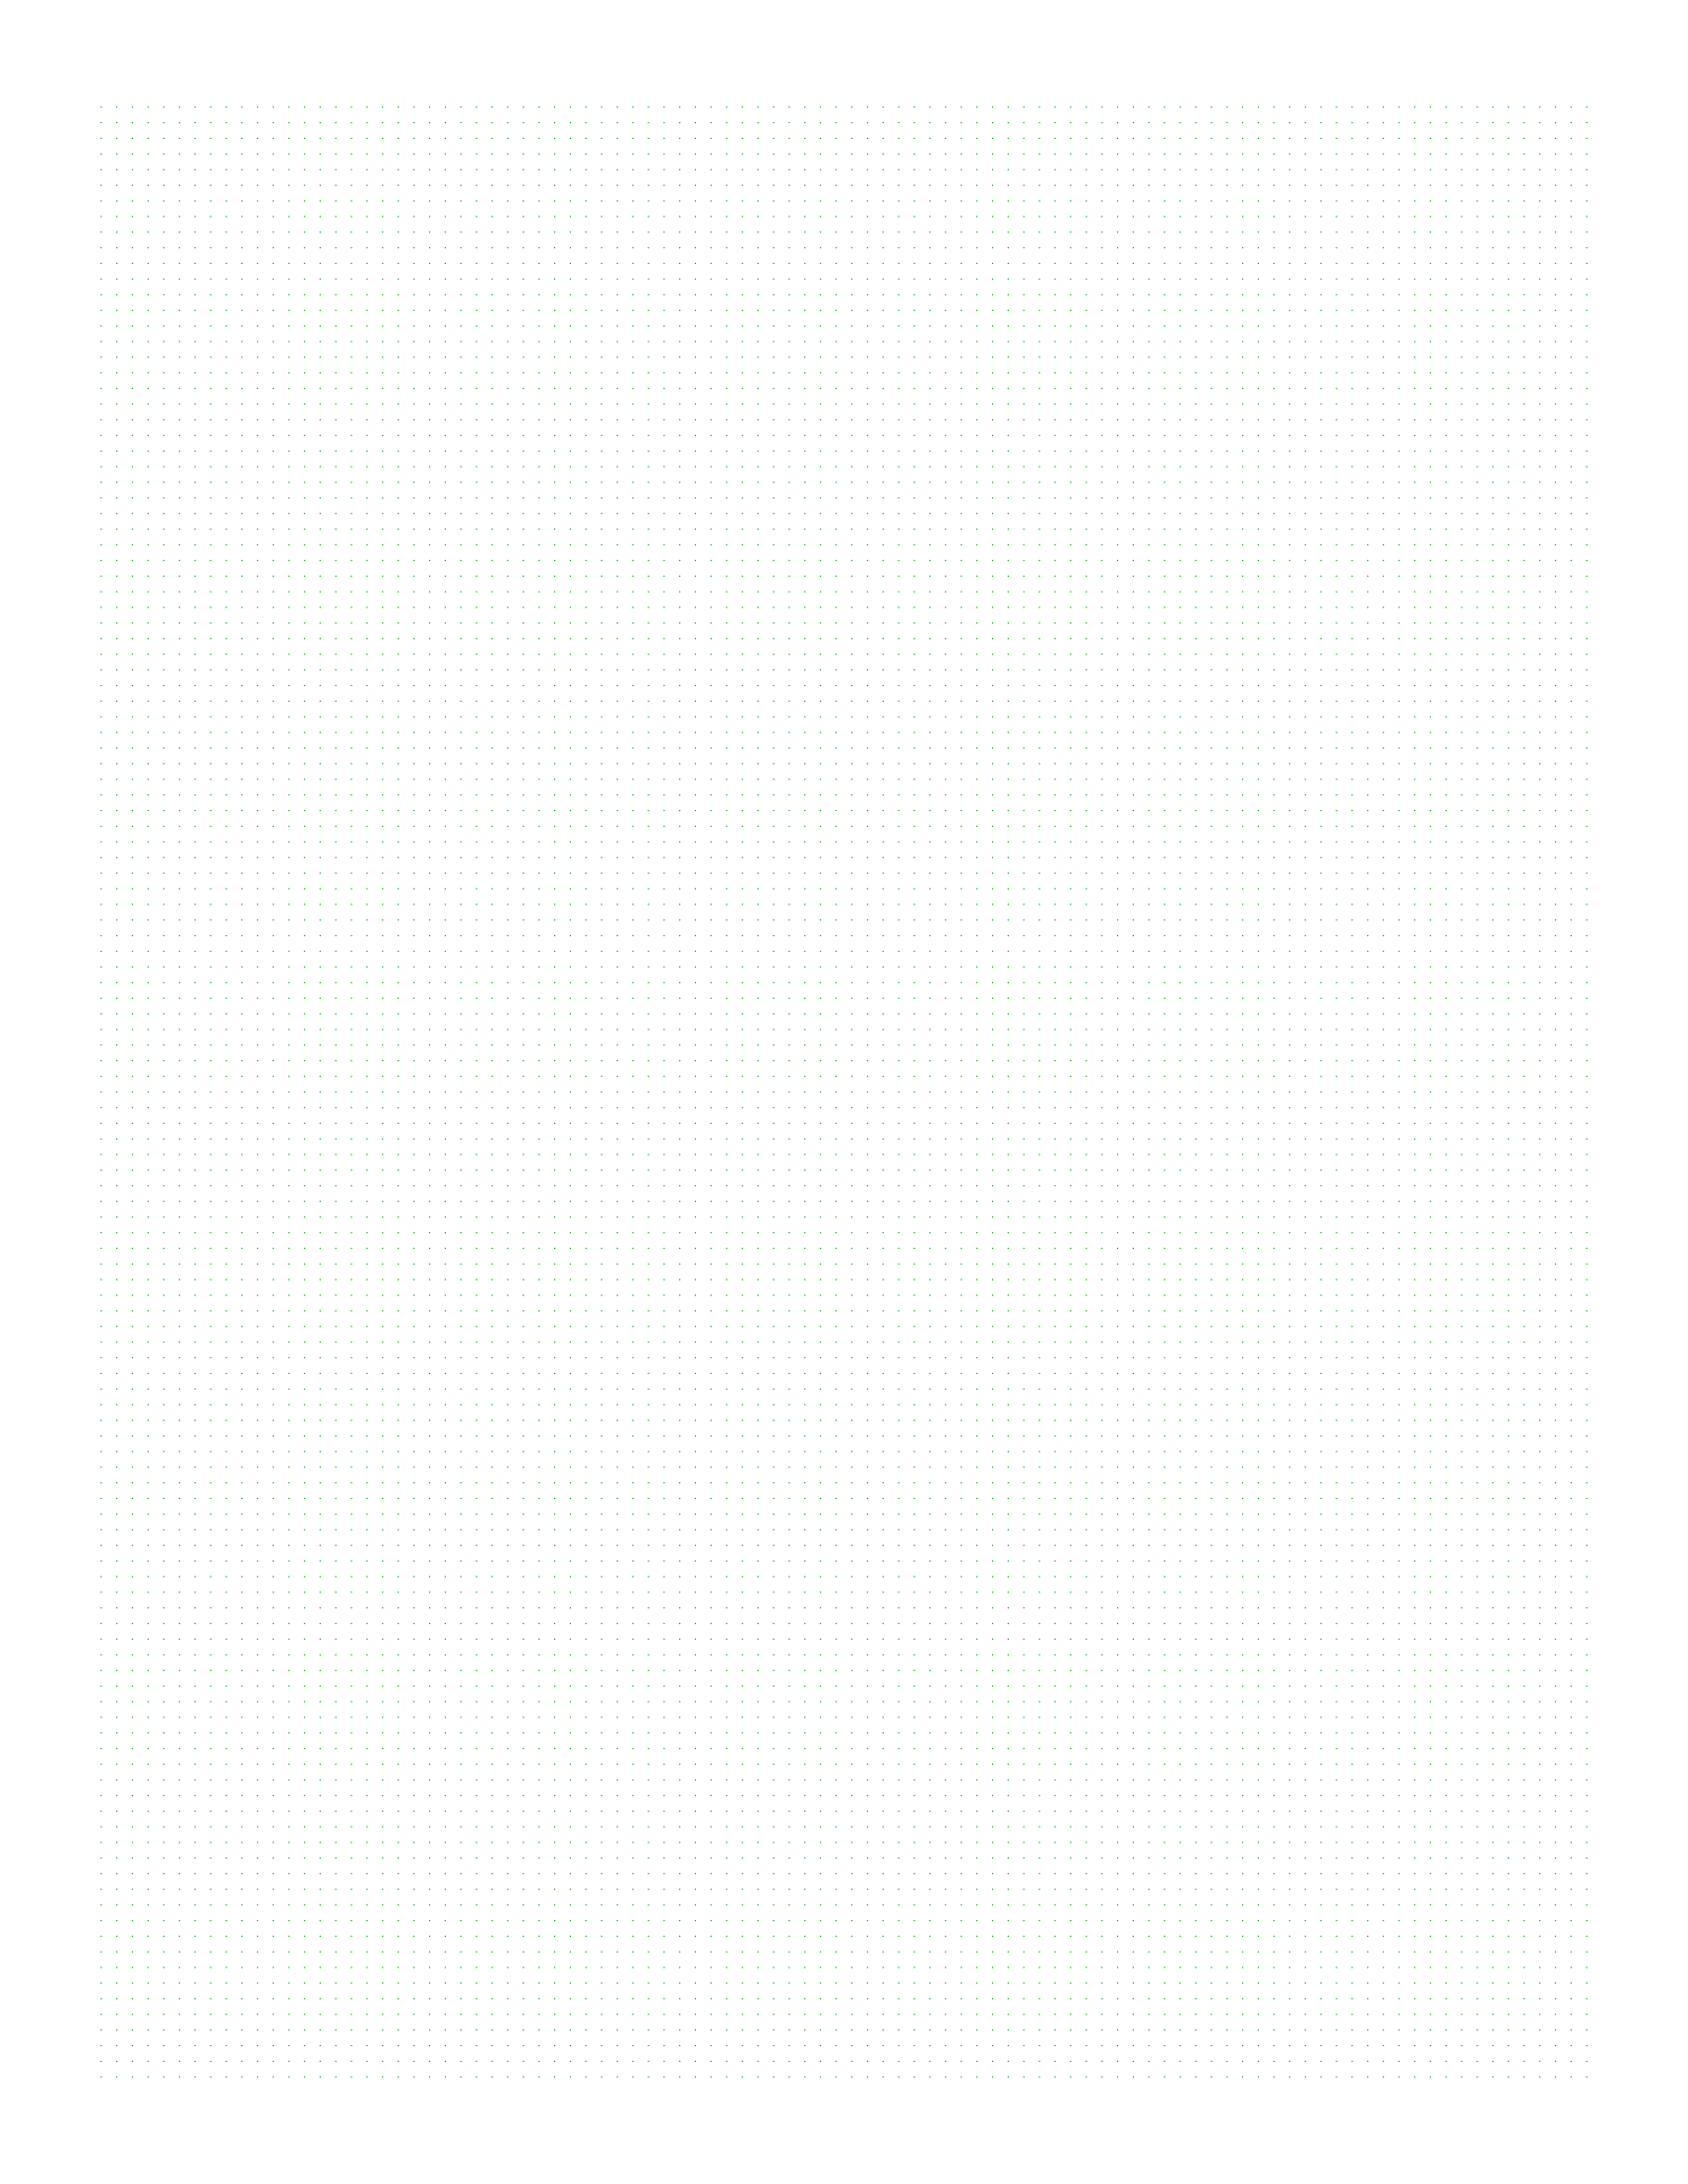 free-online-graph-paper-square-dots